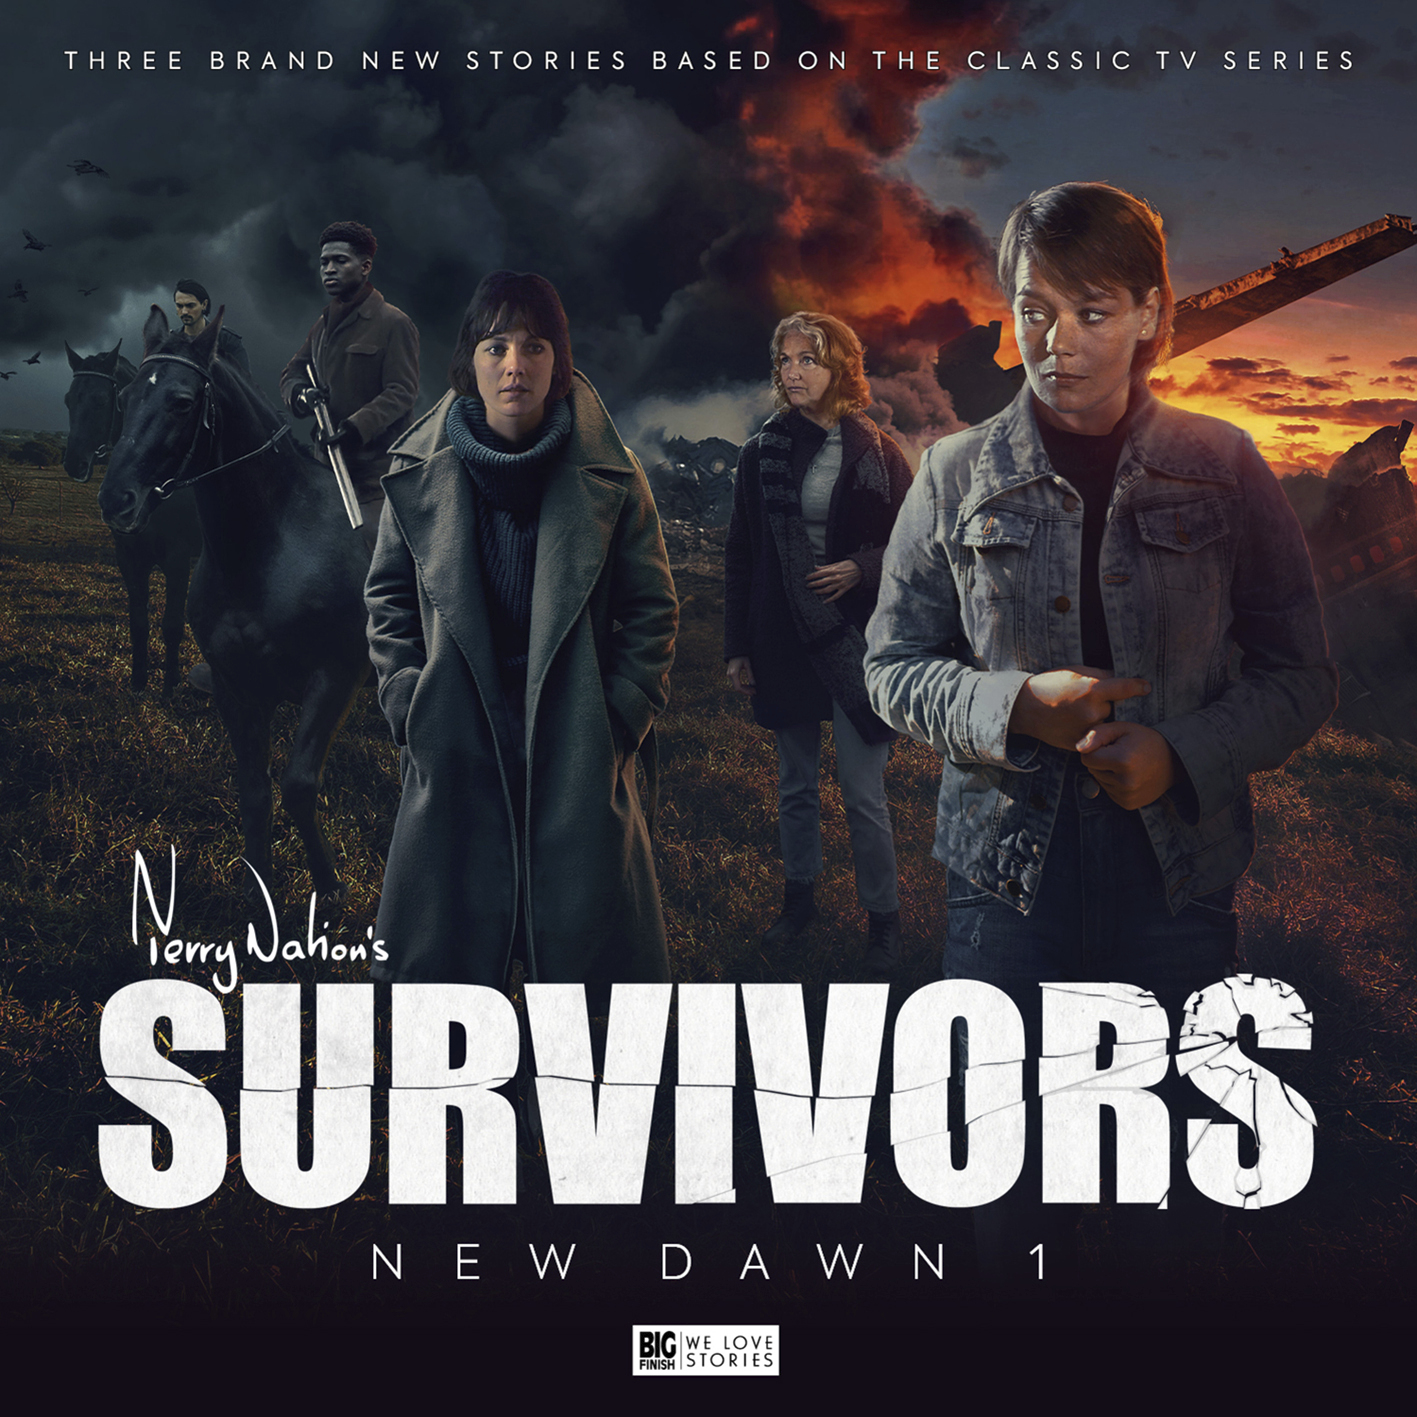 Thumbnail of the cover illustration for Big Finish's Survivors New Dawn 1